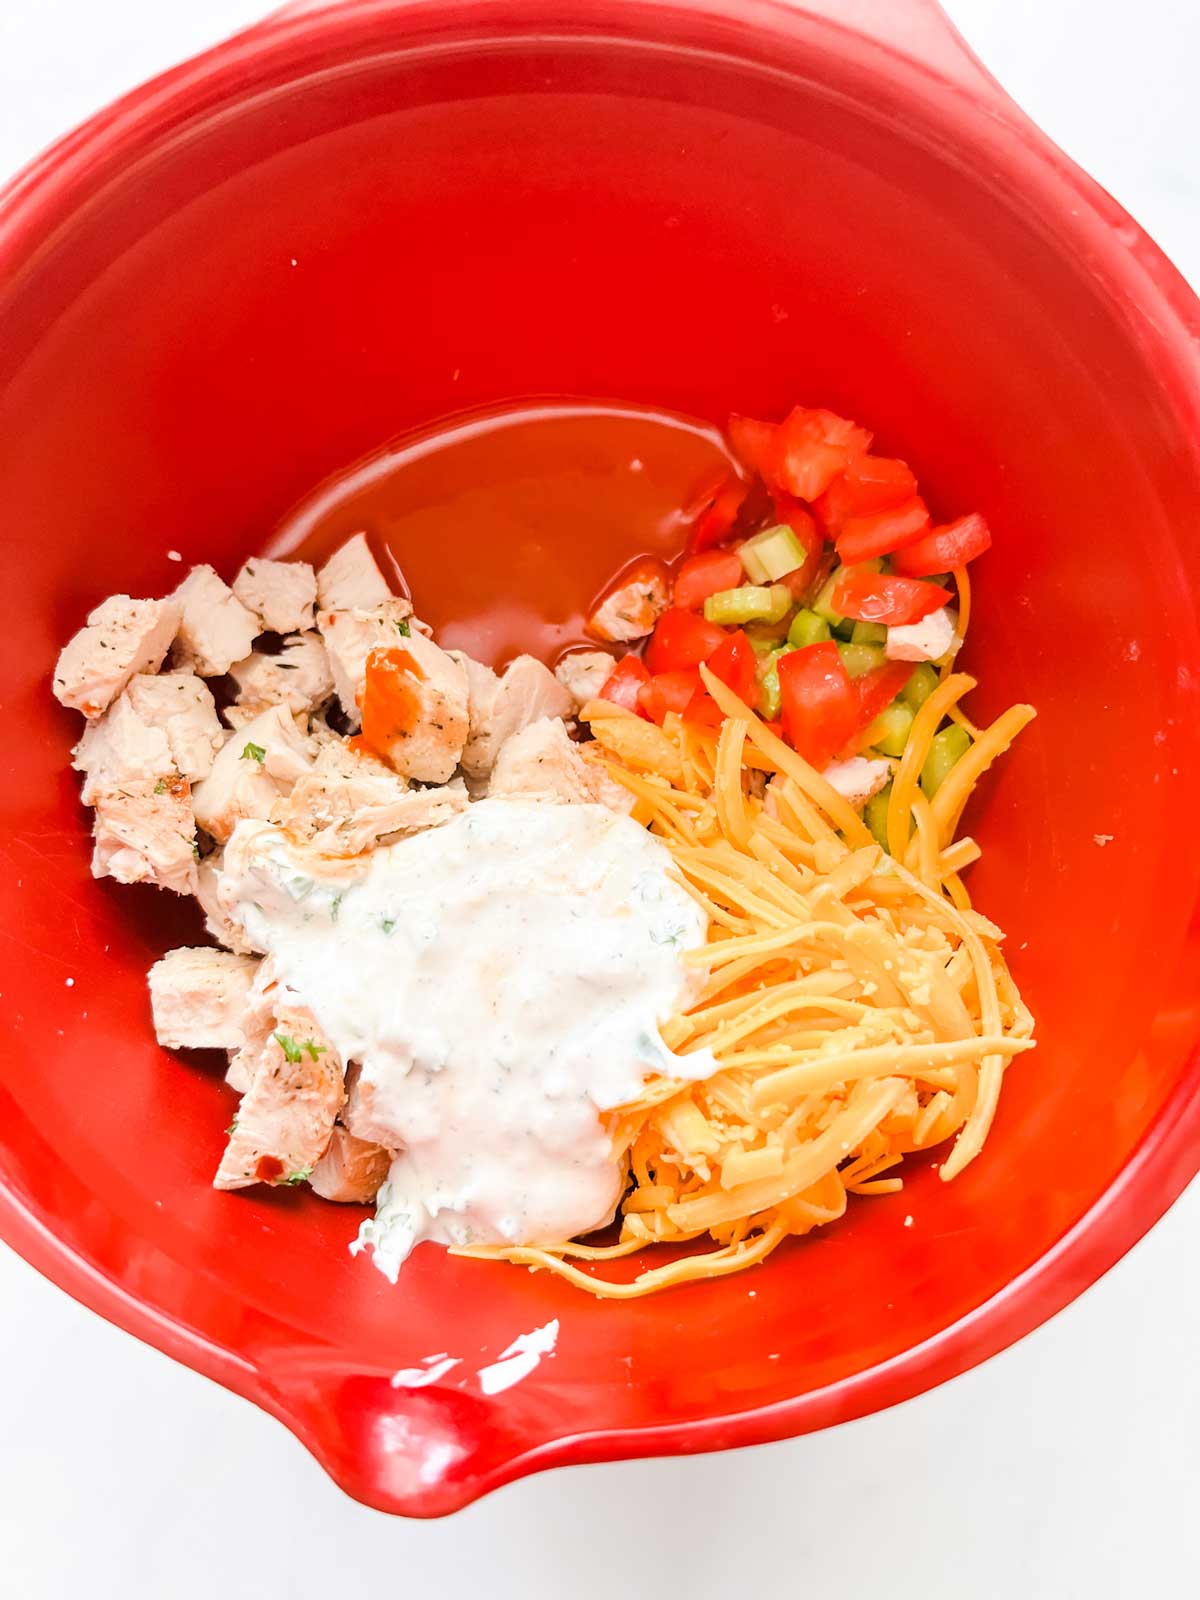 Photo of cubed chicken, celery, tomato, shredded cheddar, hot sauce, and ranch in a red bowl.